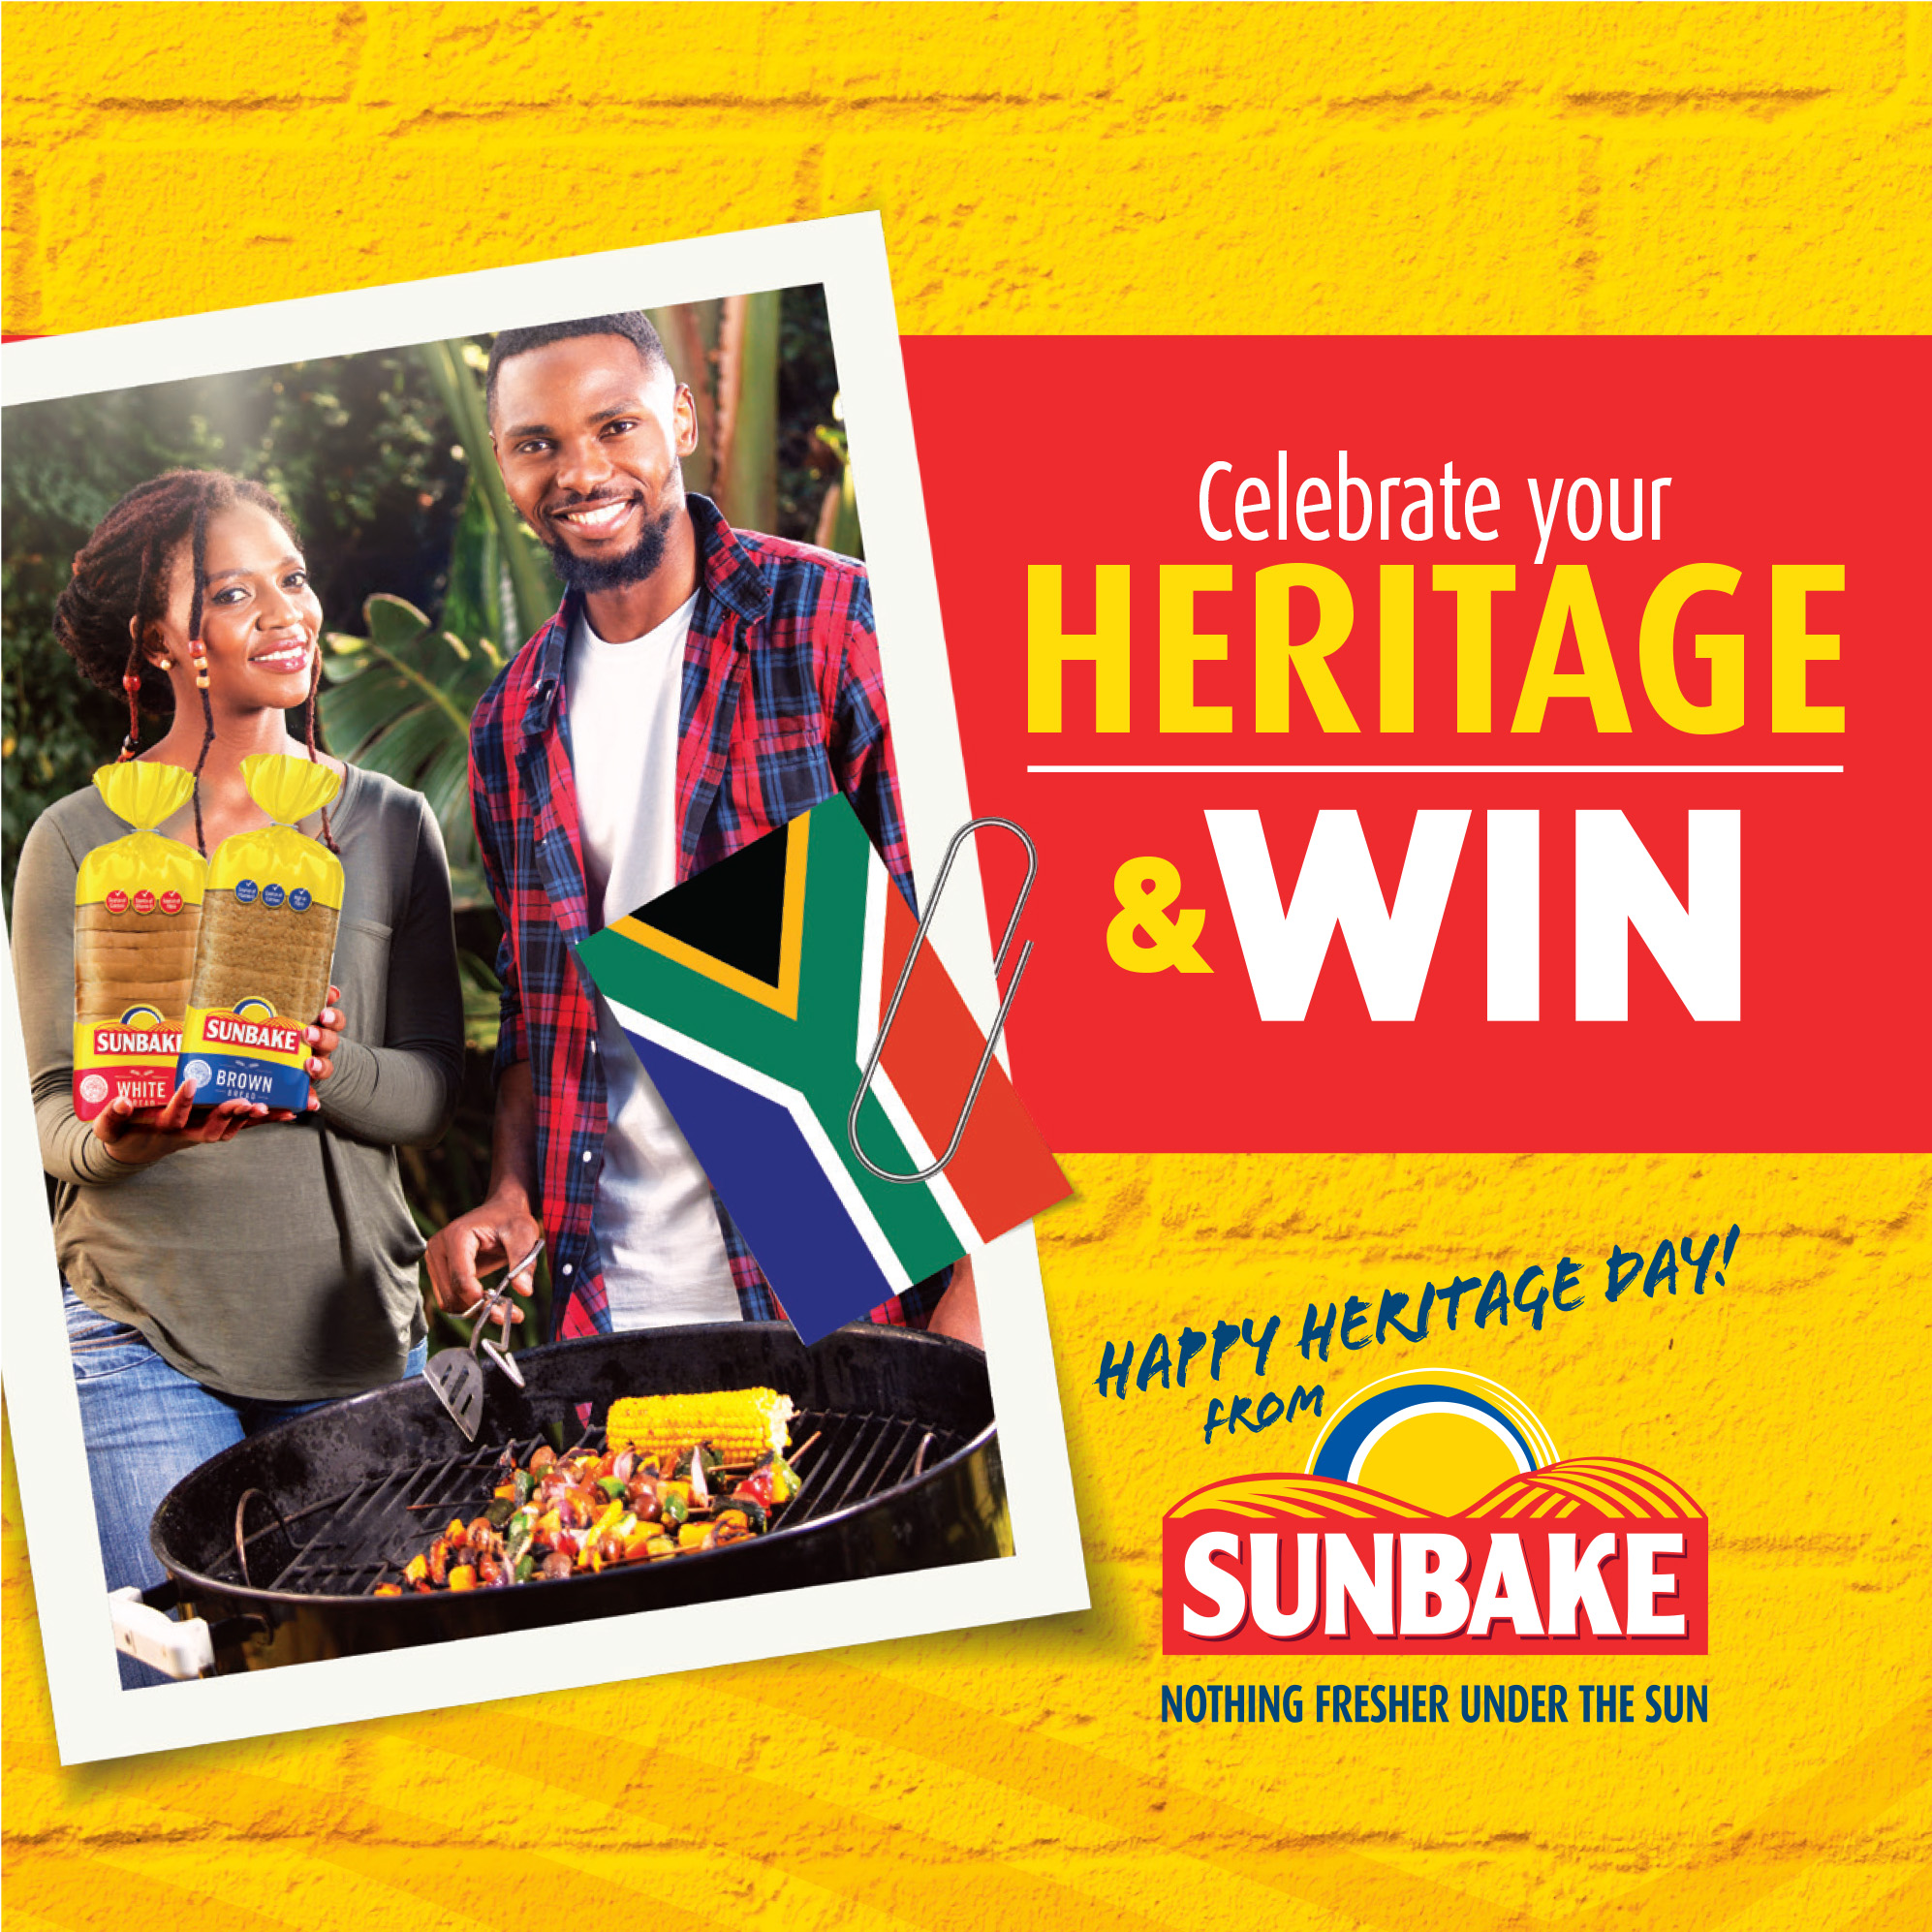 Celebrate your Heritage & WIN